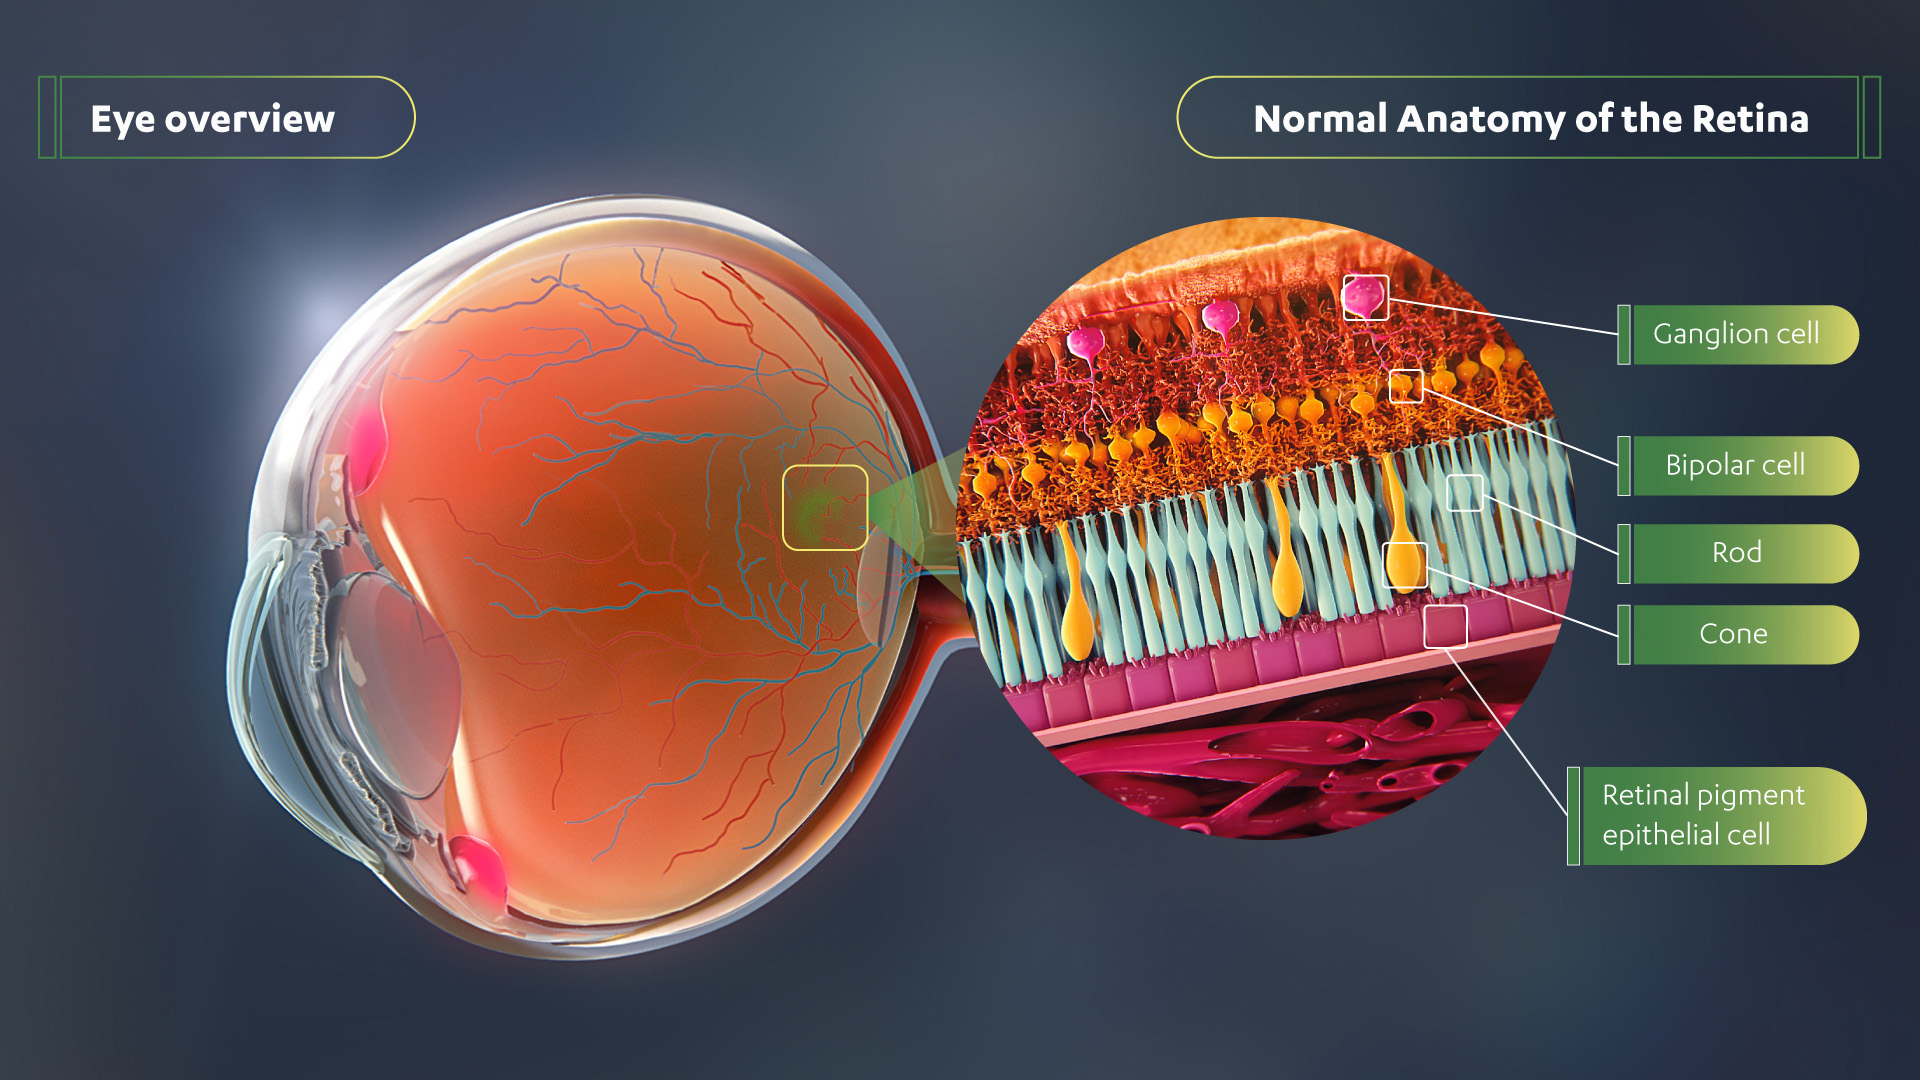 Normal Anatomy of the Retina. A multicolored diagram showing the inside of the Retina in orange and a close up of the Ganglion cells (pink), Bipolar cells (orange), Rods (blue), Cones (yellow) and Retinal pigment epithelial cell (maroon).